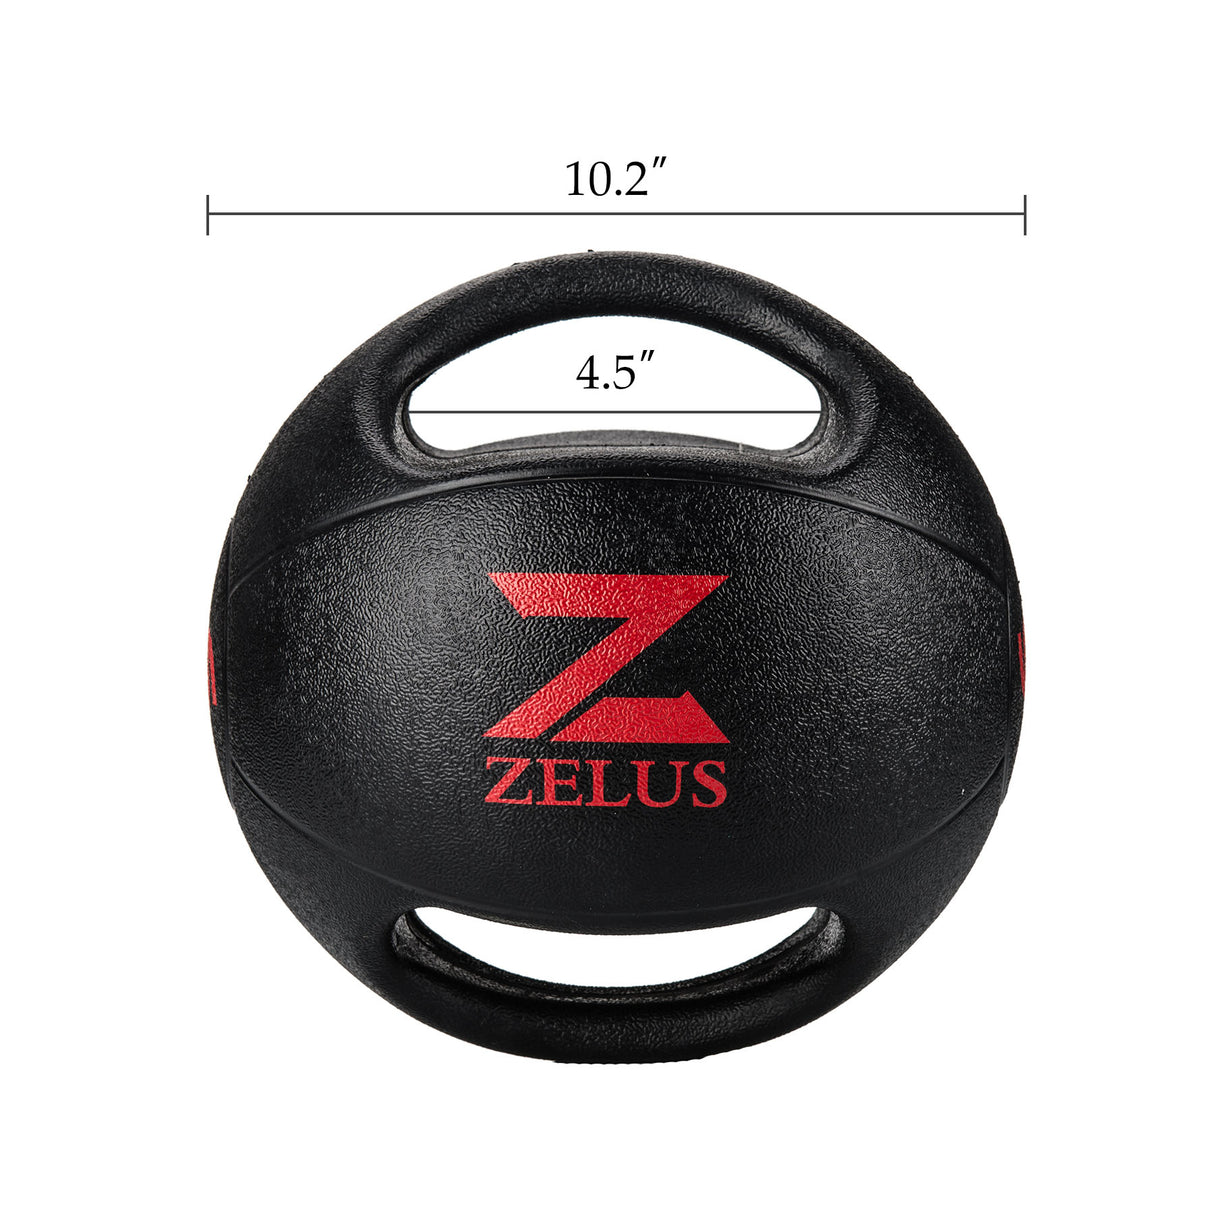 10 lb weighted exercise ball with handles